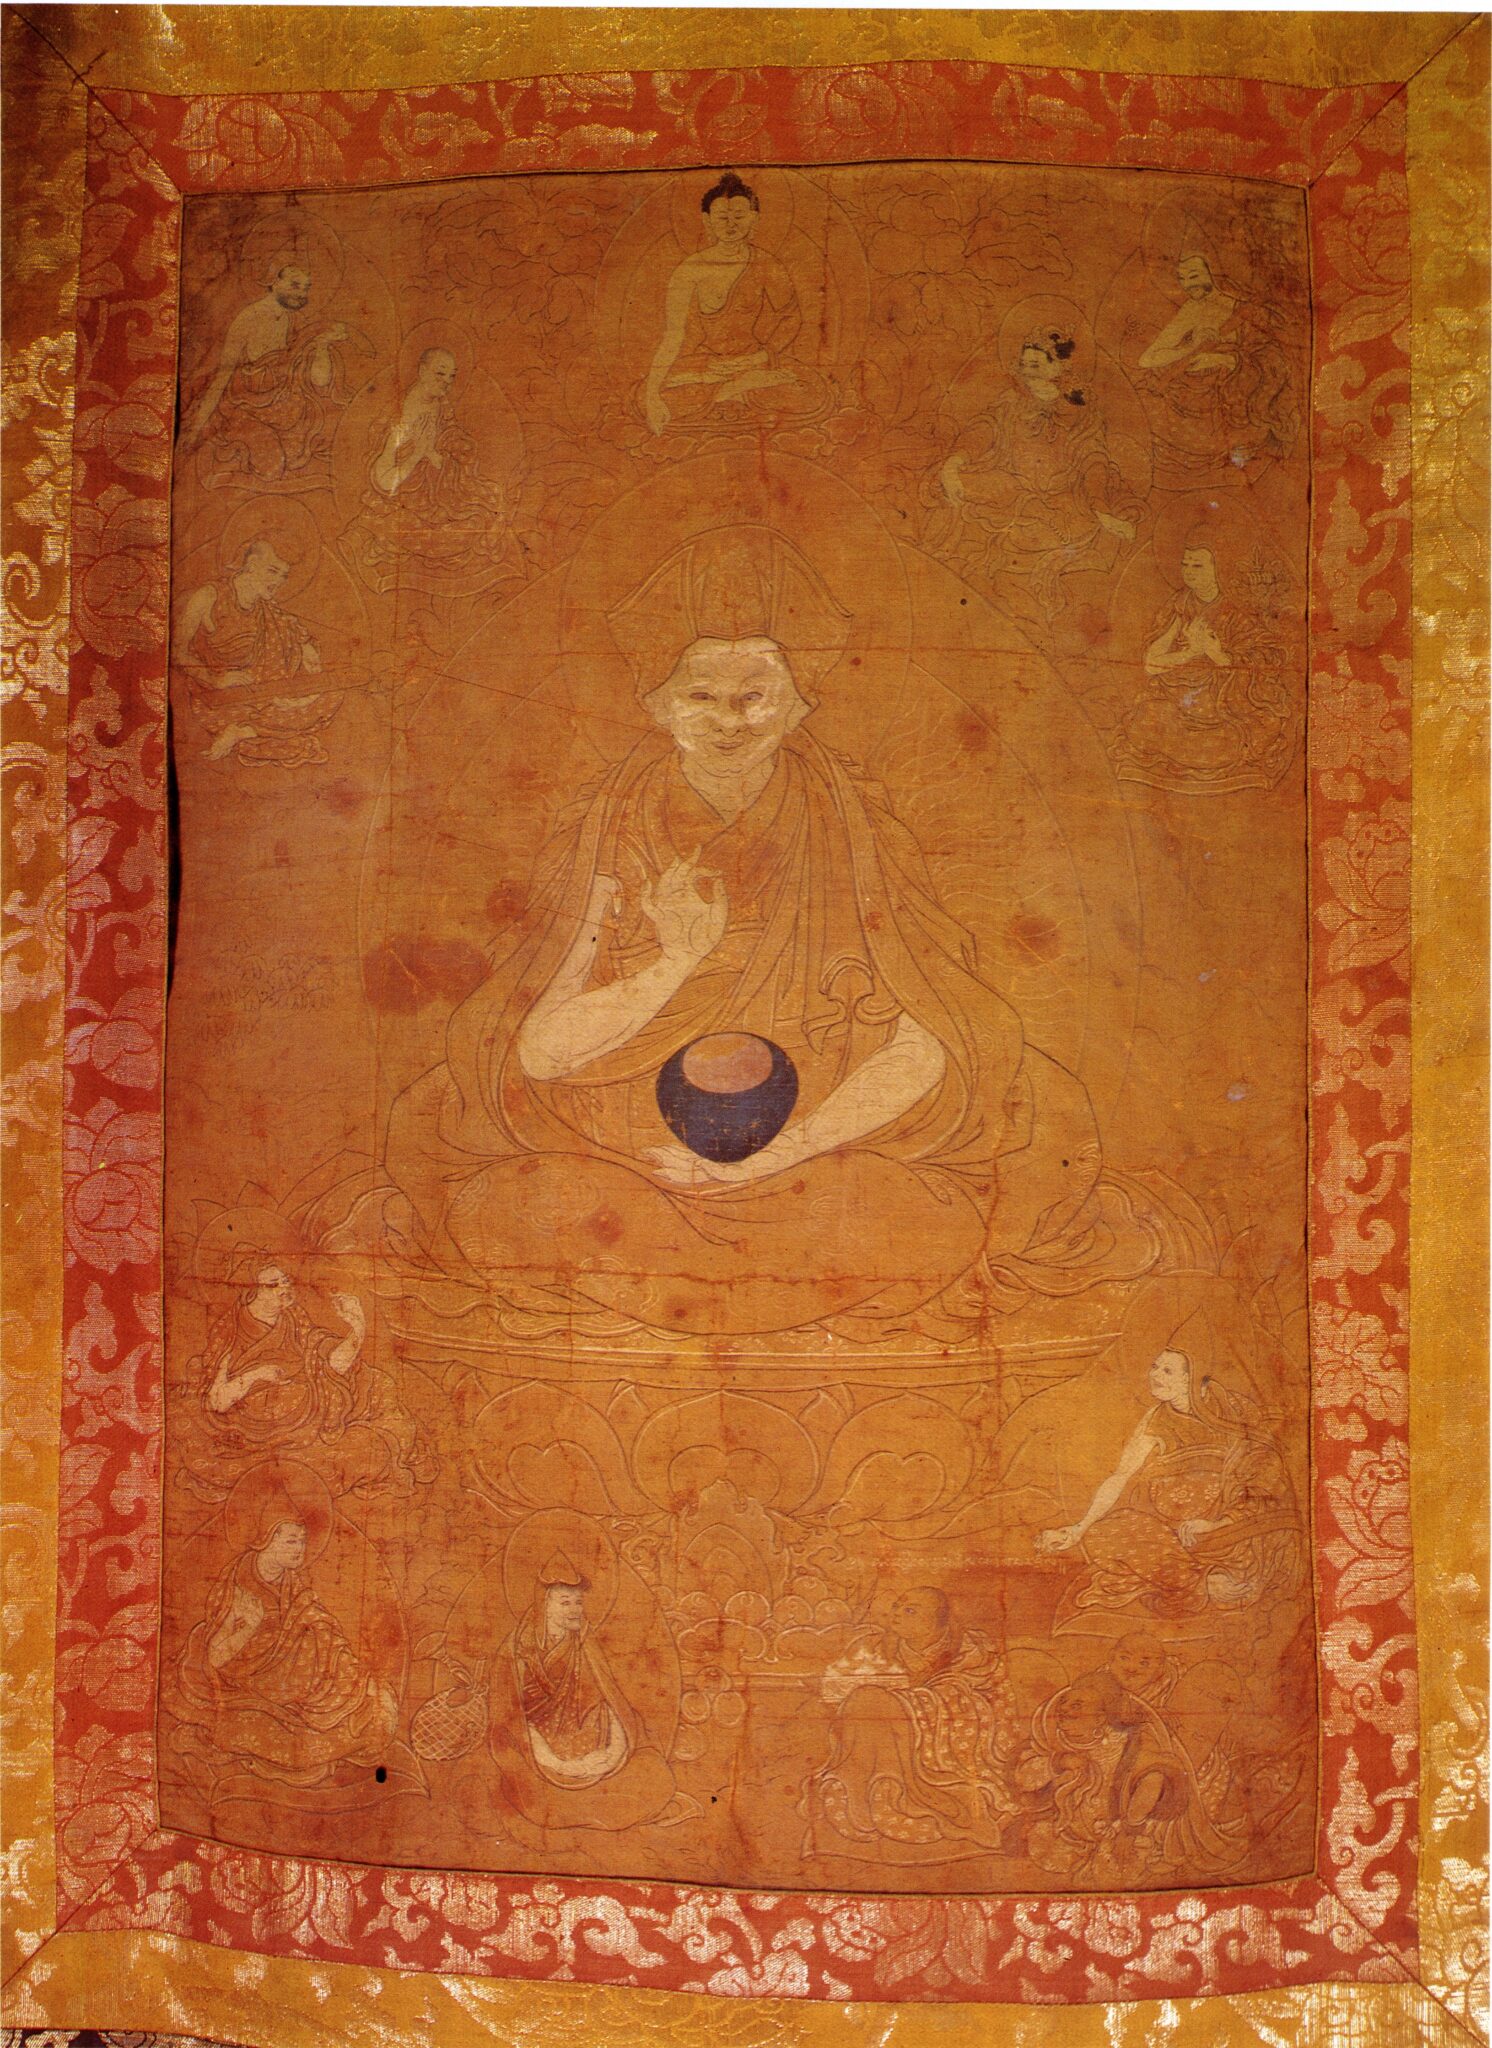 Saffron-colored painting mounted on orange and yellow brocade depicting seated Lama surrounded by small figures